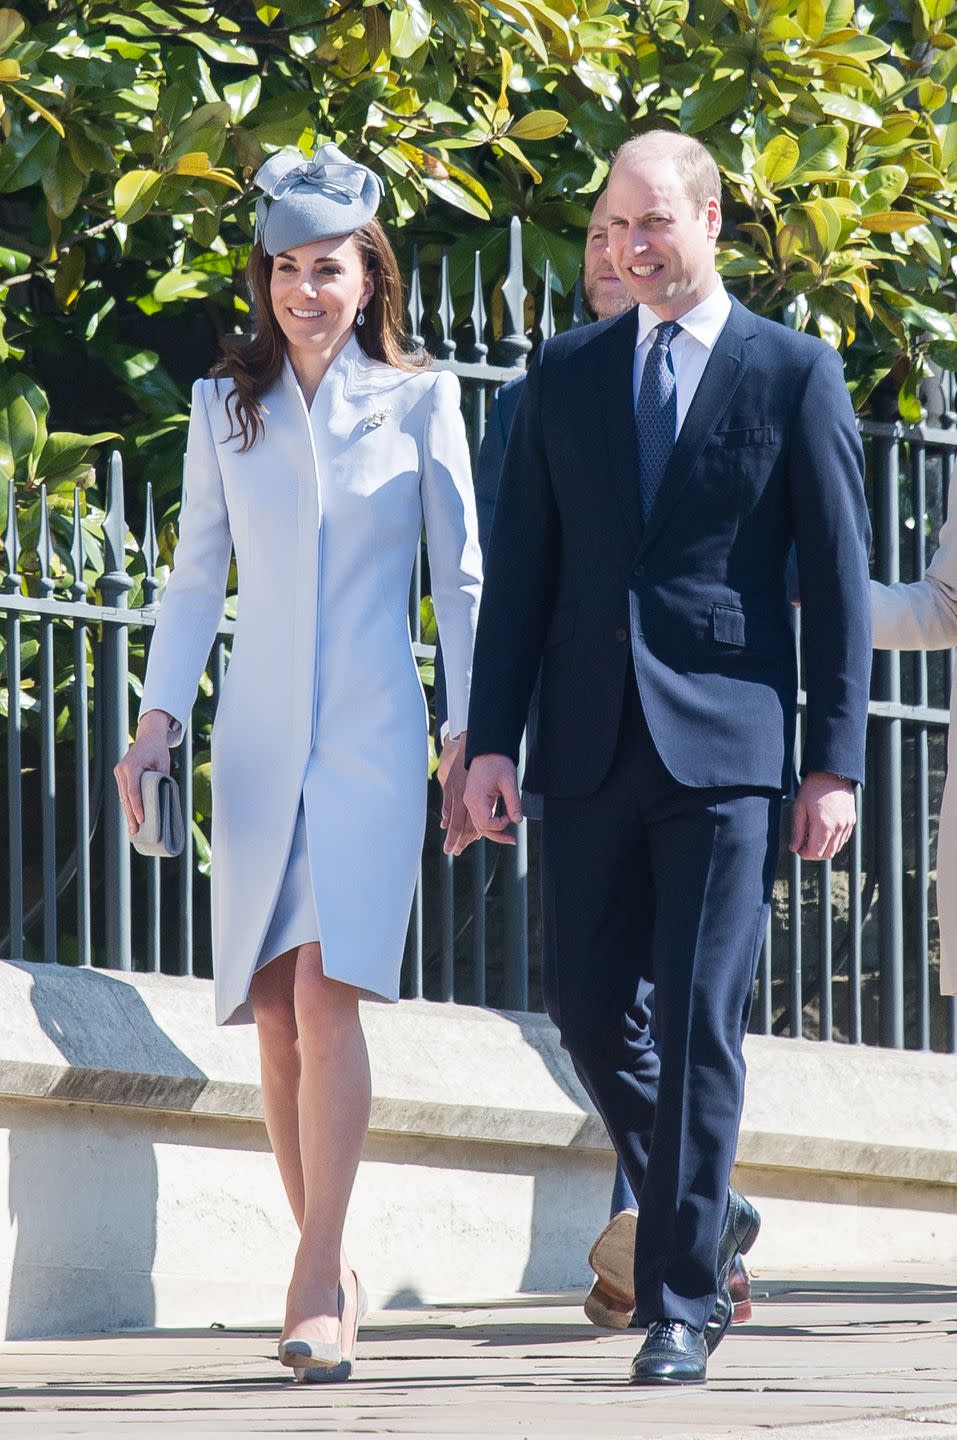 See All the Photos of the Royal Family Attending Easter Church Services This Morning